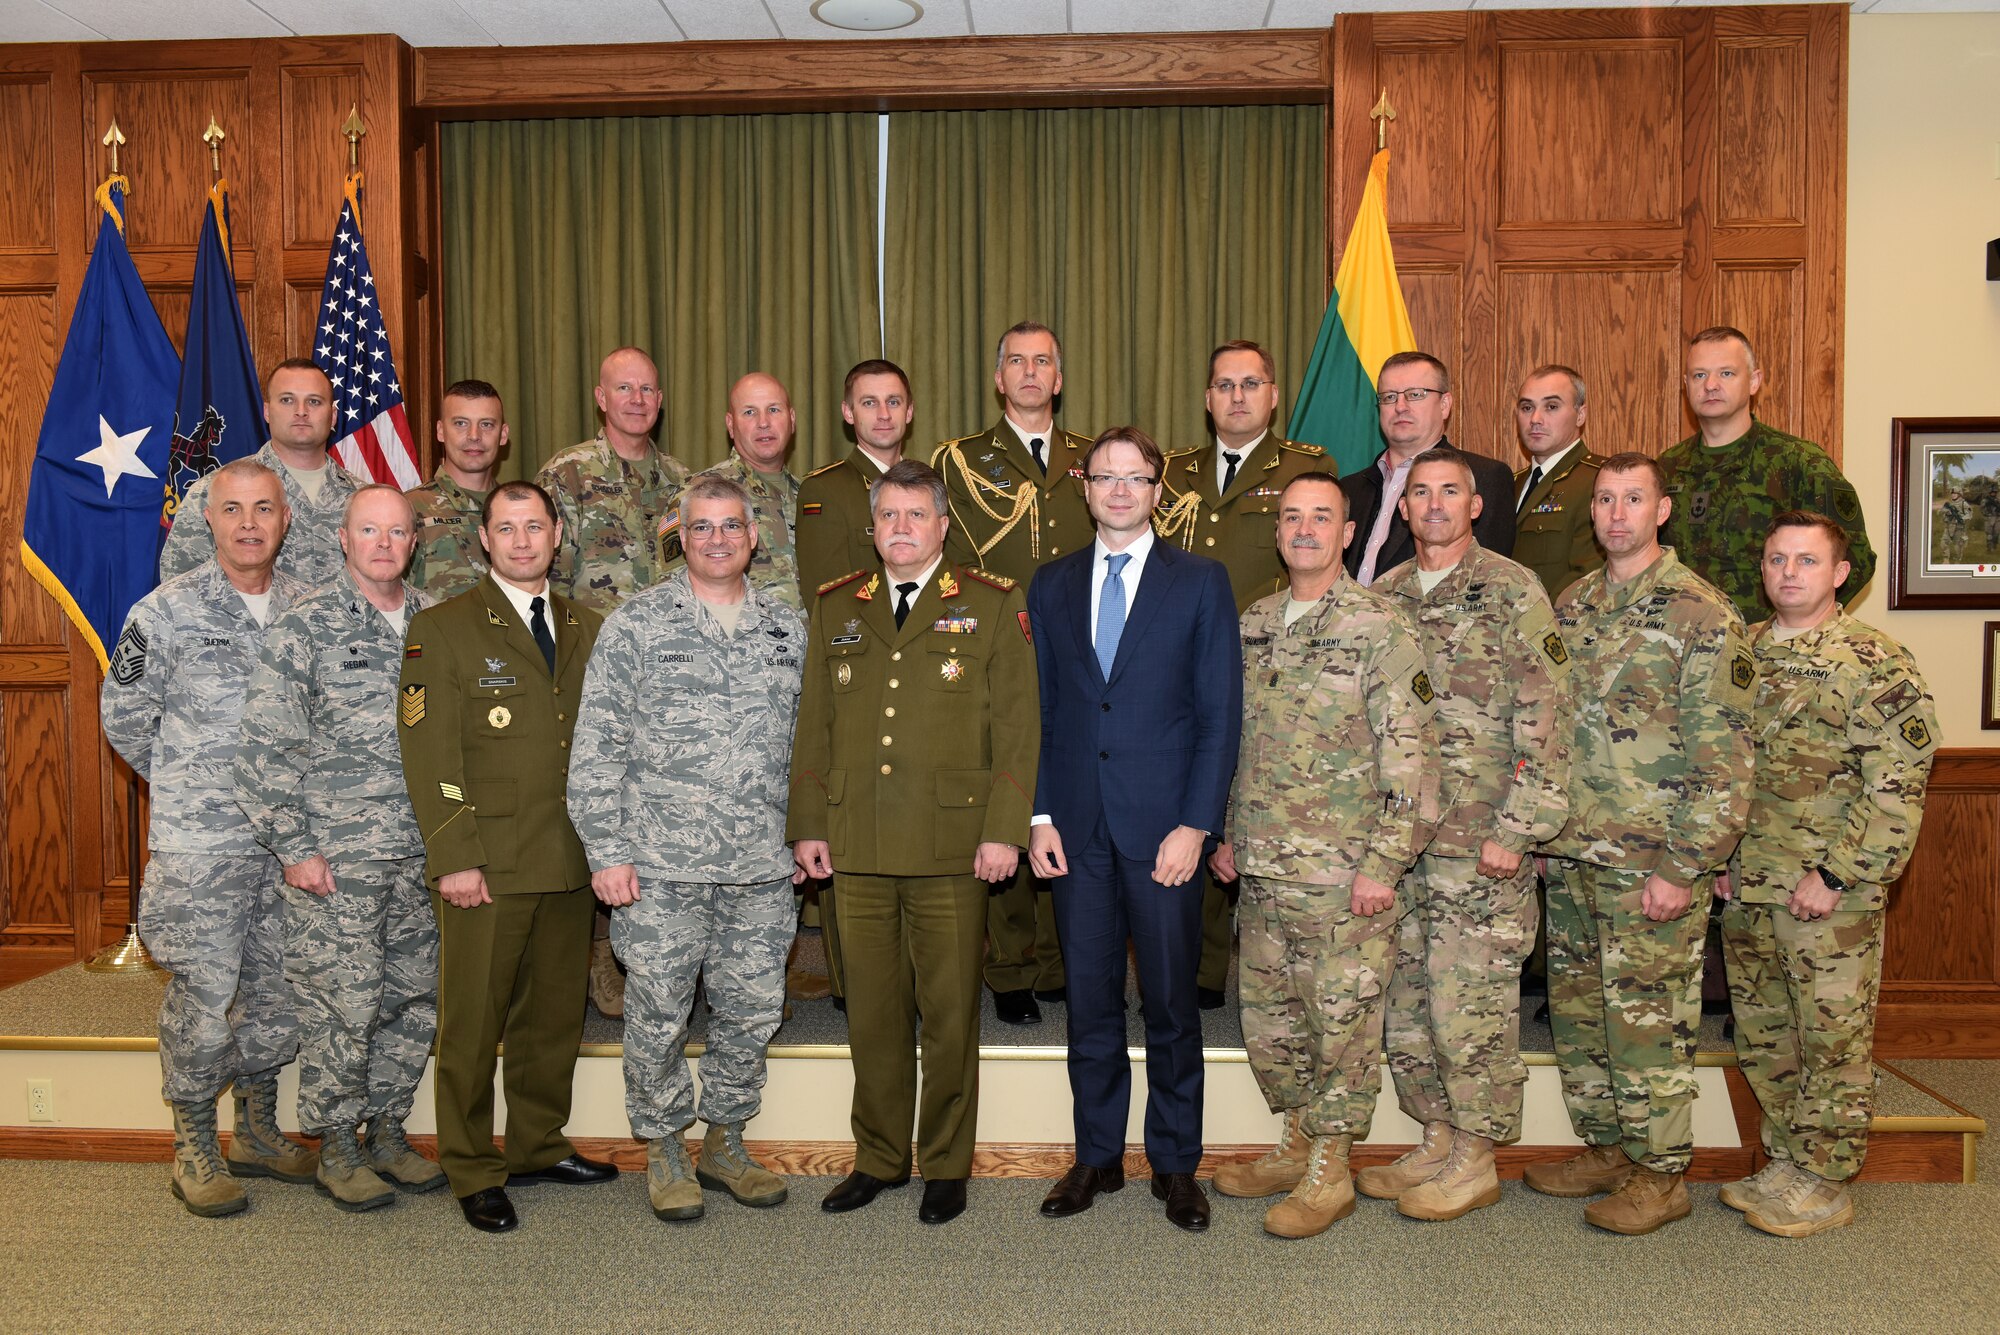 Brig. Gen. Tony Carrelli (front row, fourth from left), adjutant general, Pennsylvania National Guard, and Lt. Gen. Jonas Vytautas Zukas (front row, fifth from left), chief of defense of Lithuania, along with Lithuanian Ambassador Rolandas Krisciunas (front row, sixth from left) and other Lithuanian officials and members of the PANG, met Oct. 15 at the joint force headquarters, Fort Indiantown Gap, Annville, Pa., in an effort to continue fostering a state-country partnership that began in 1993. The day’s events commenced with a meeting between Carrelli and Vytautas Zukas and their respective staffs. While on post, the distinguished guests received tours of the PANG joint emergency operations center and various training facilities. They also got an in-depth look at the PANG’s unmanned aerial vehicle fleet and Advanced Joint Terminal Attack Controller Training System, which provides realistic battlespace scenarios that prepare Airmen for field missions. (U.S. Air National Guard photo by 2nd Lt. Susan Penning/Released)